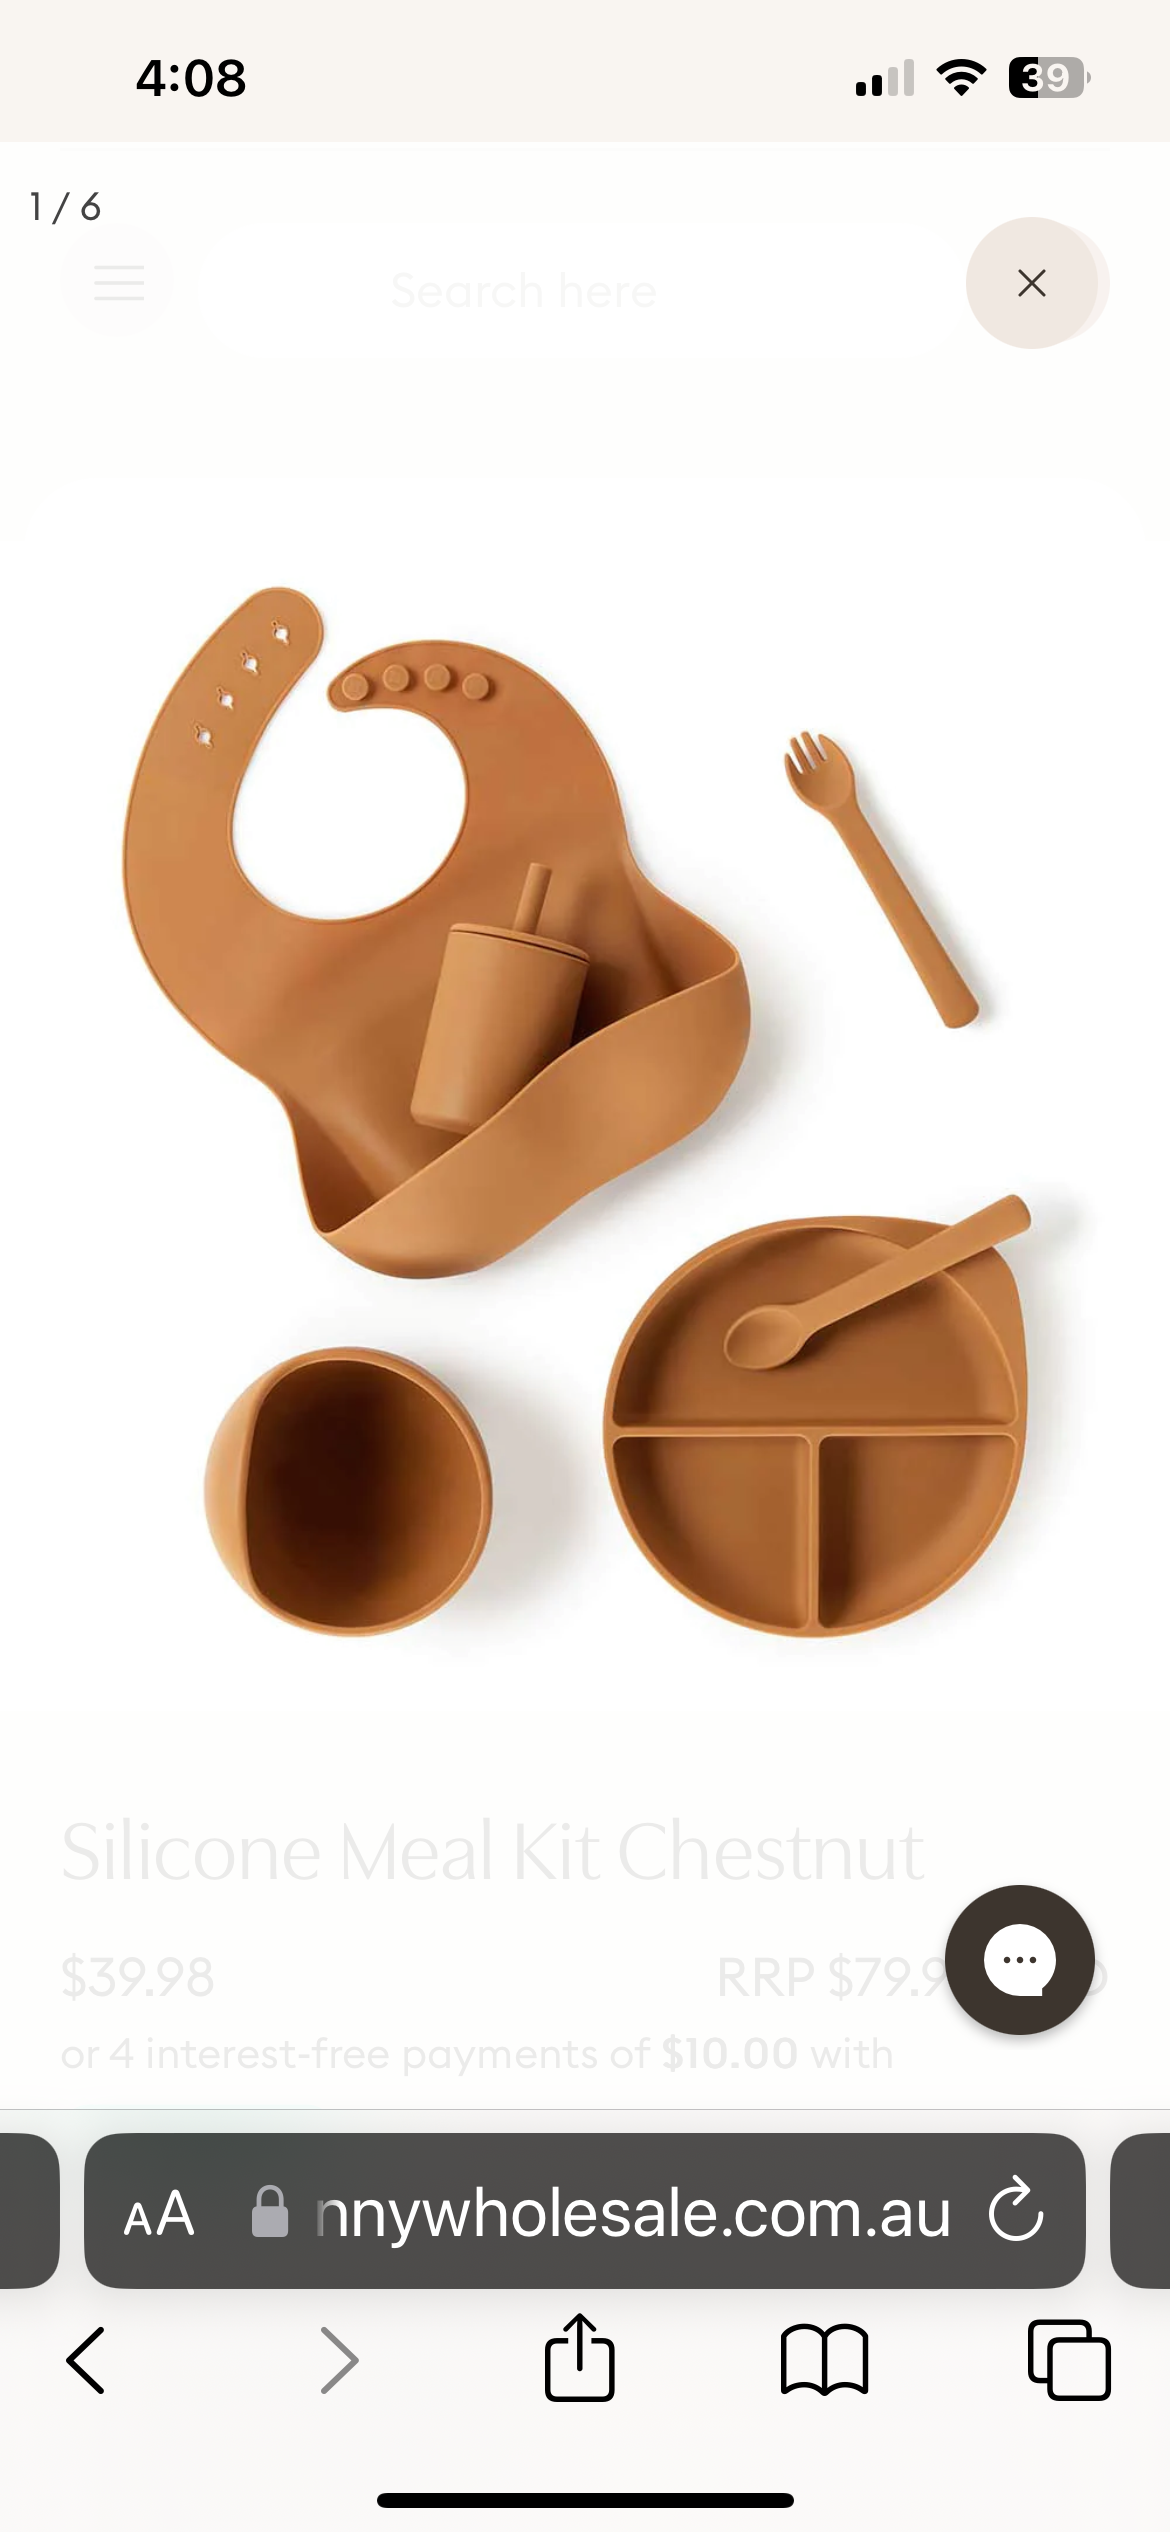 Snuggle Hunny Silicone Meal Kit Chestnut